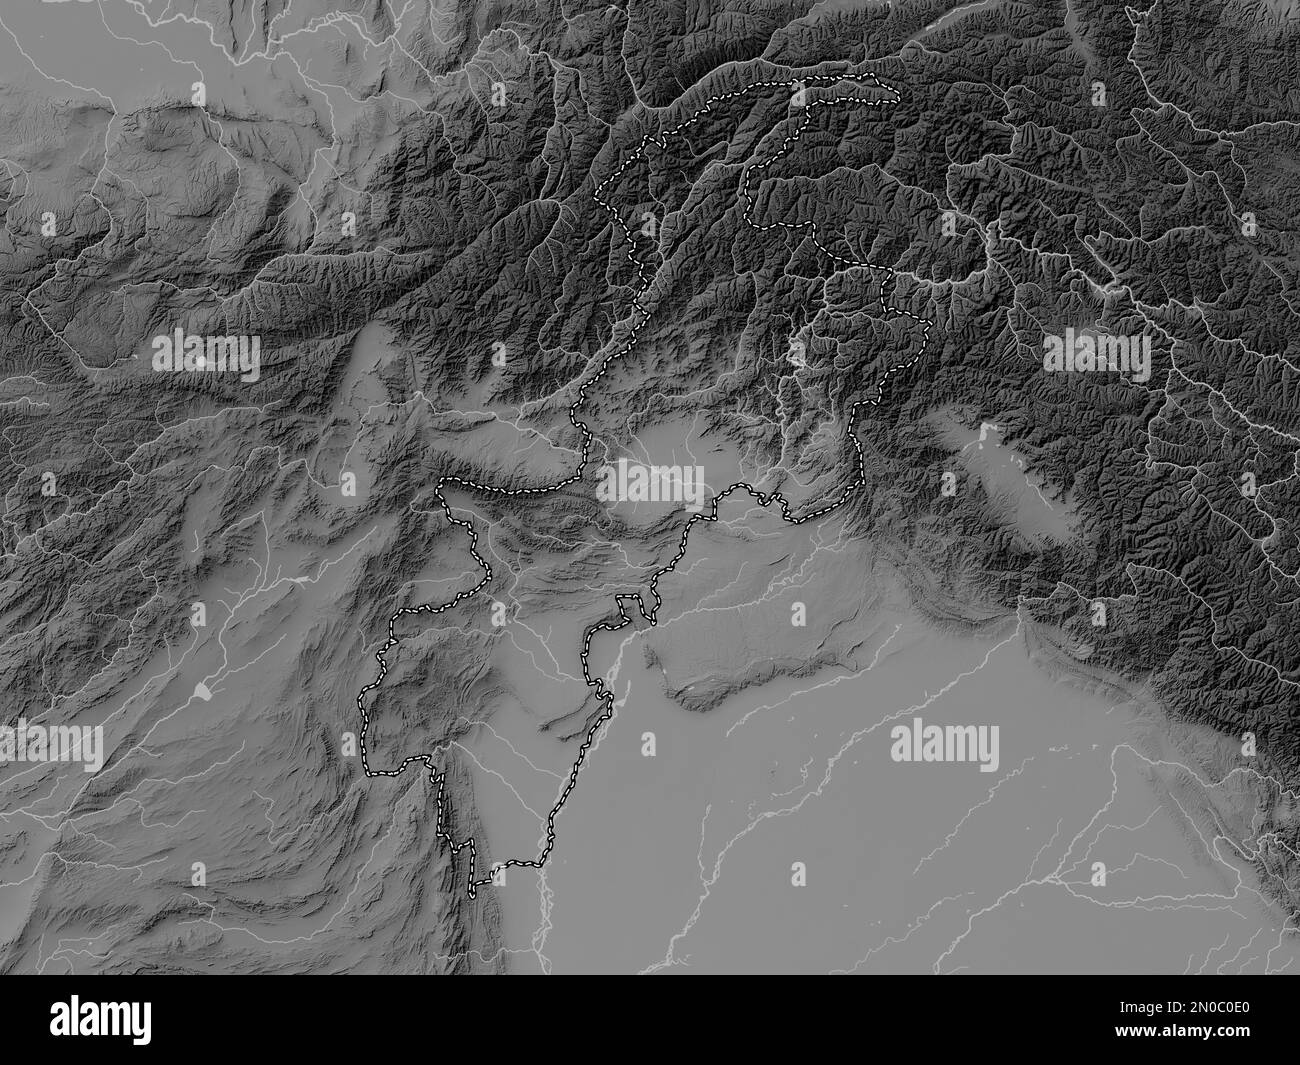 Khyber Pakhtunkhwa, province of Pakistan. Grayscale elevation map with lakes and rivers Stock Photo